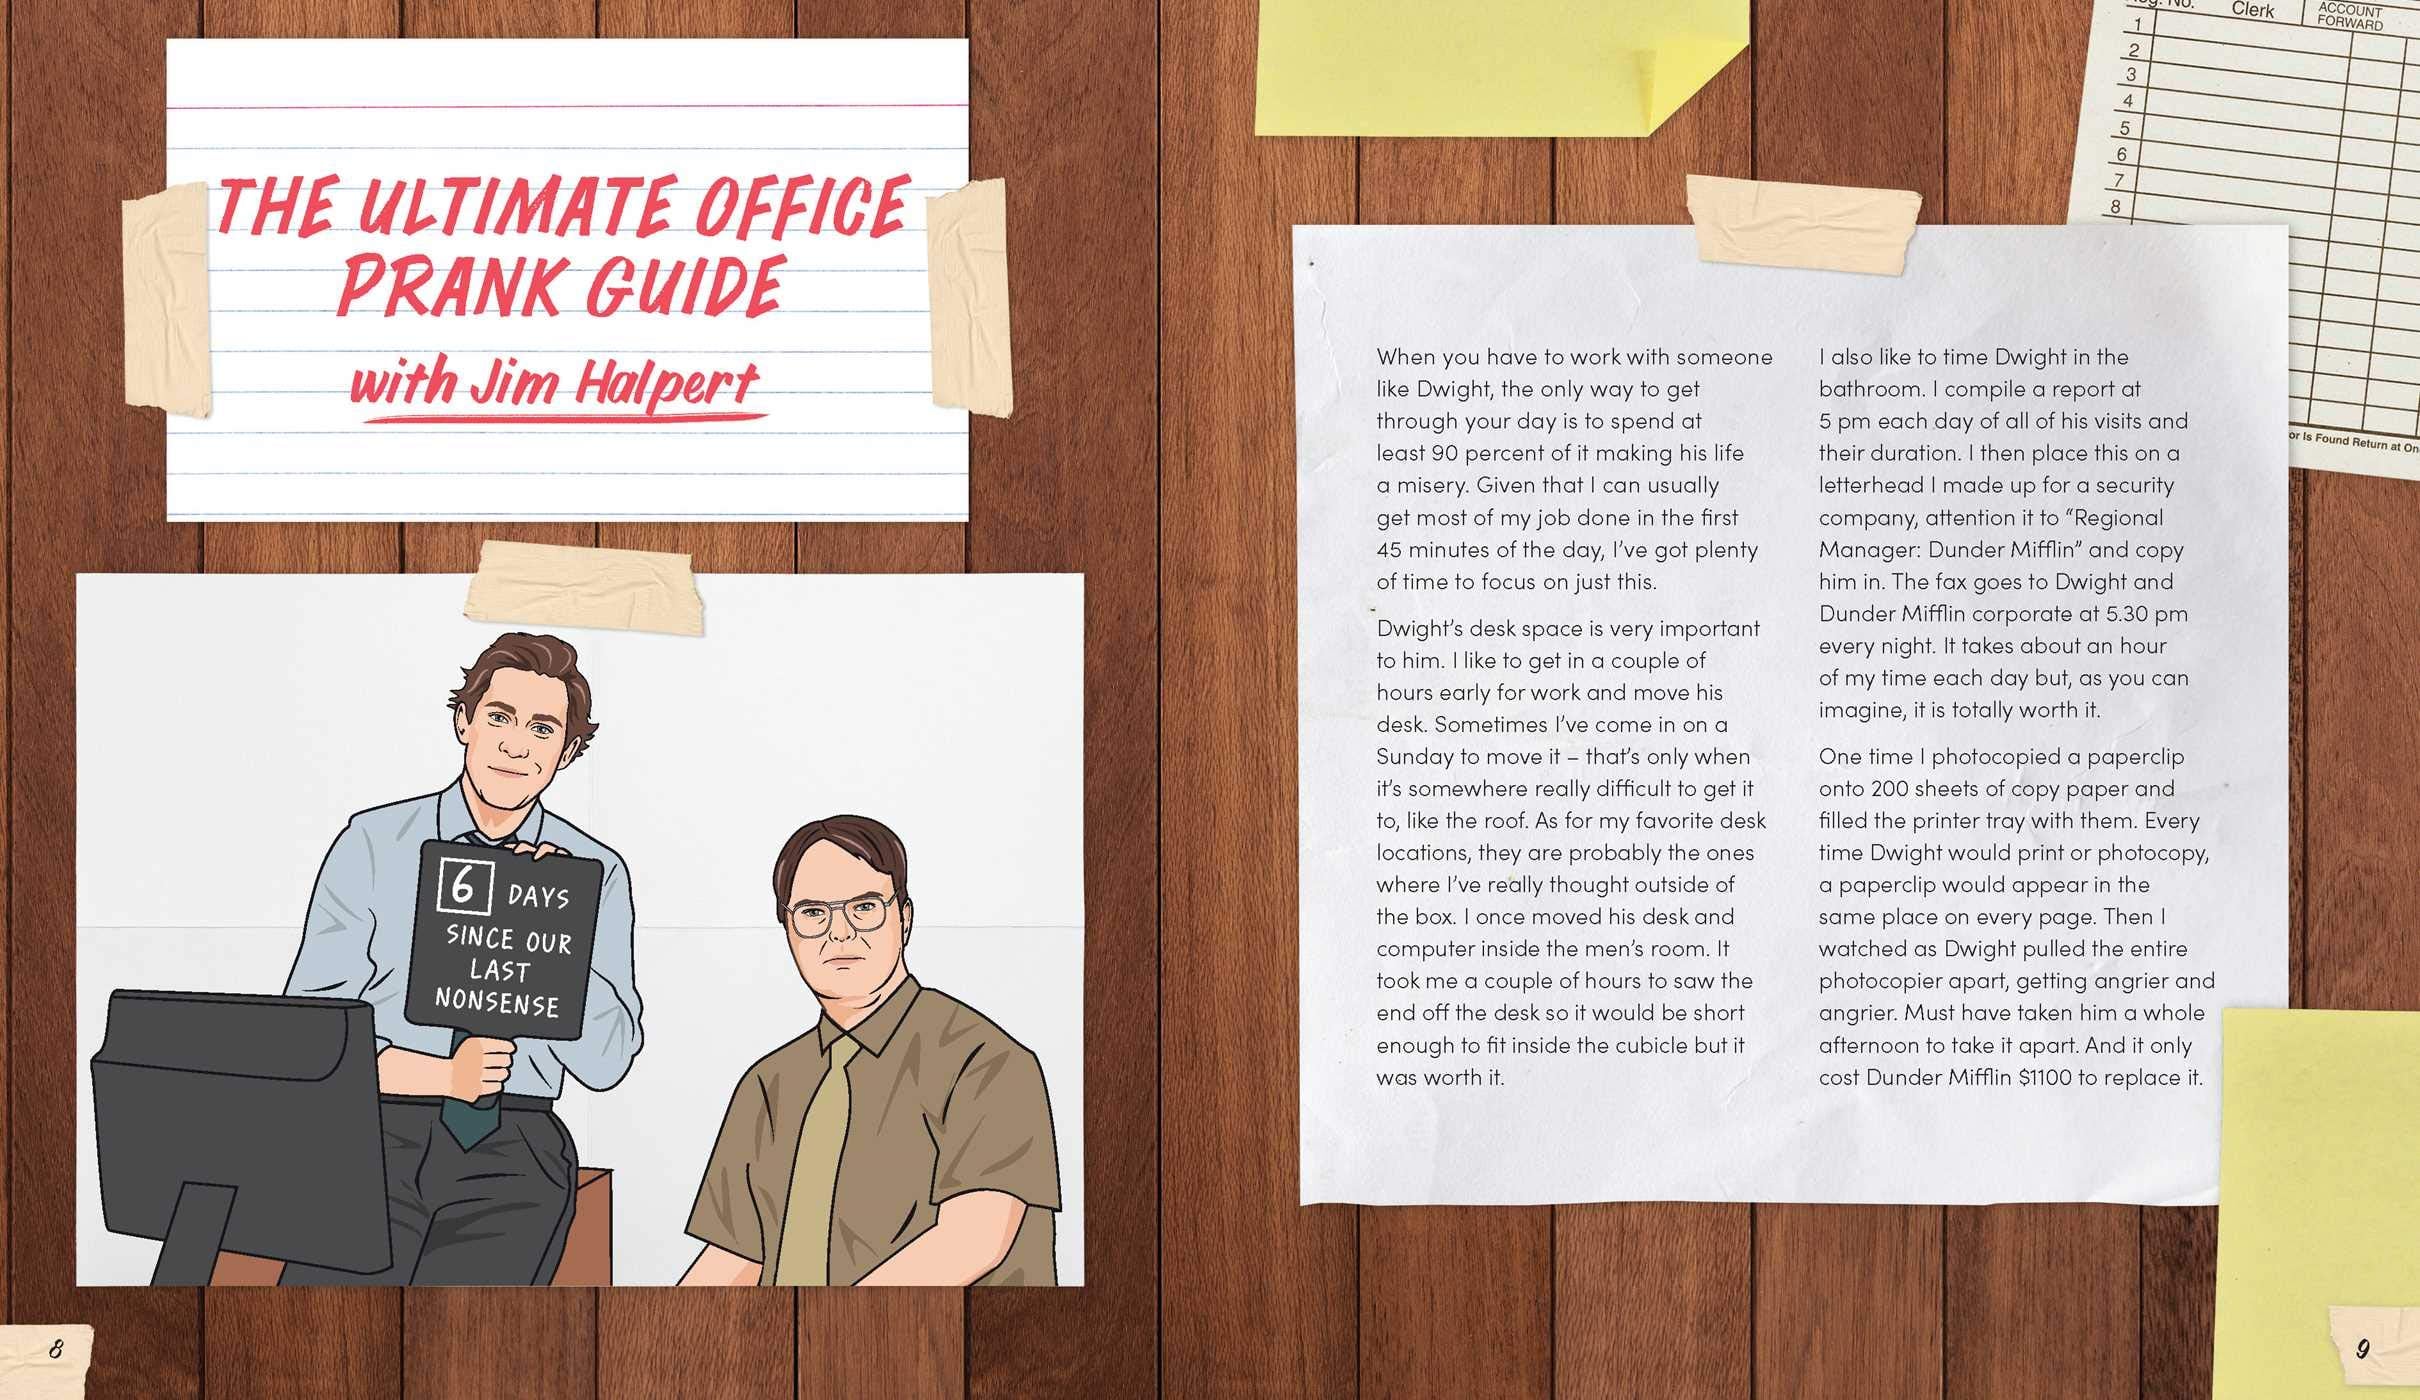 The Office Book of Lists: The Official Guide to Quotes, Pranks, Characters,  and Memorable Moments from Dunder Mifflin